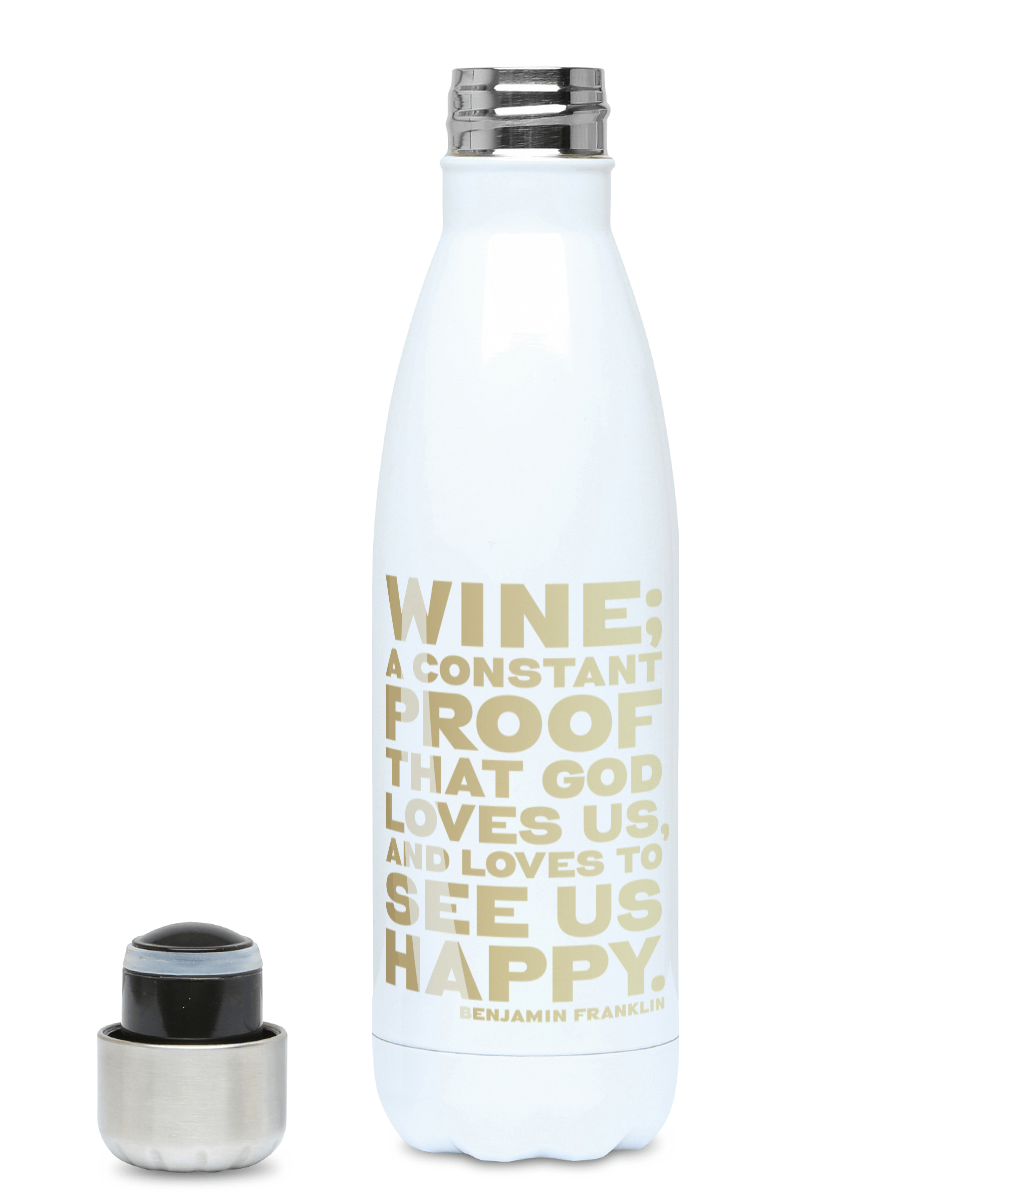 500ml Water Bottle -Wine is constant proof that God loves us and likes to see us happy - Benjamin Franklin (WHITE)